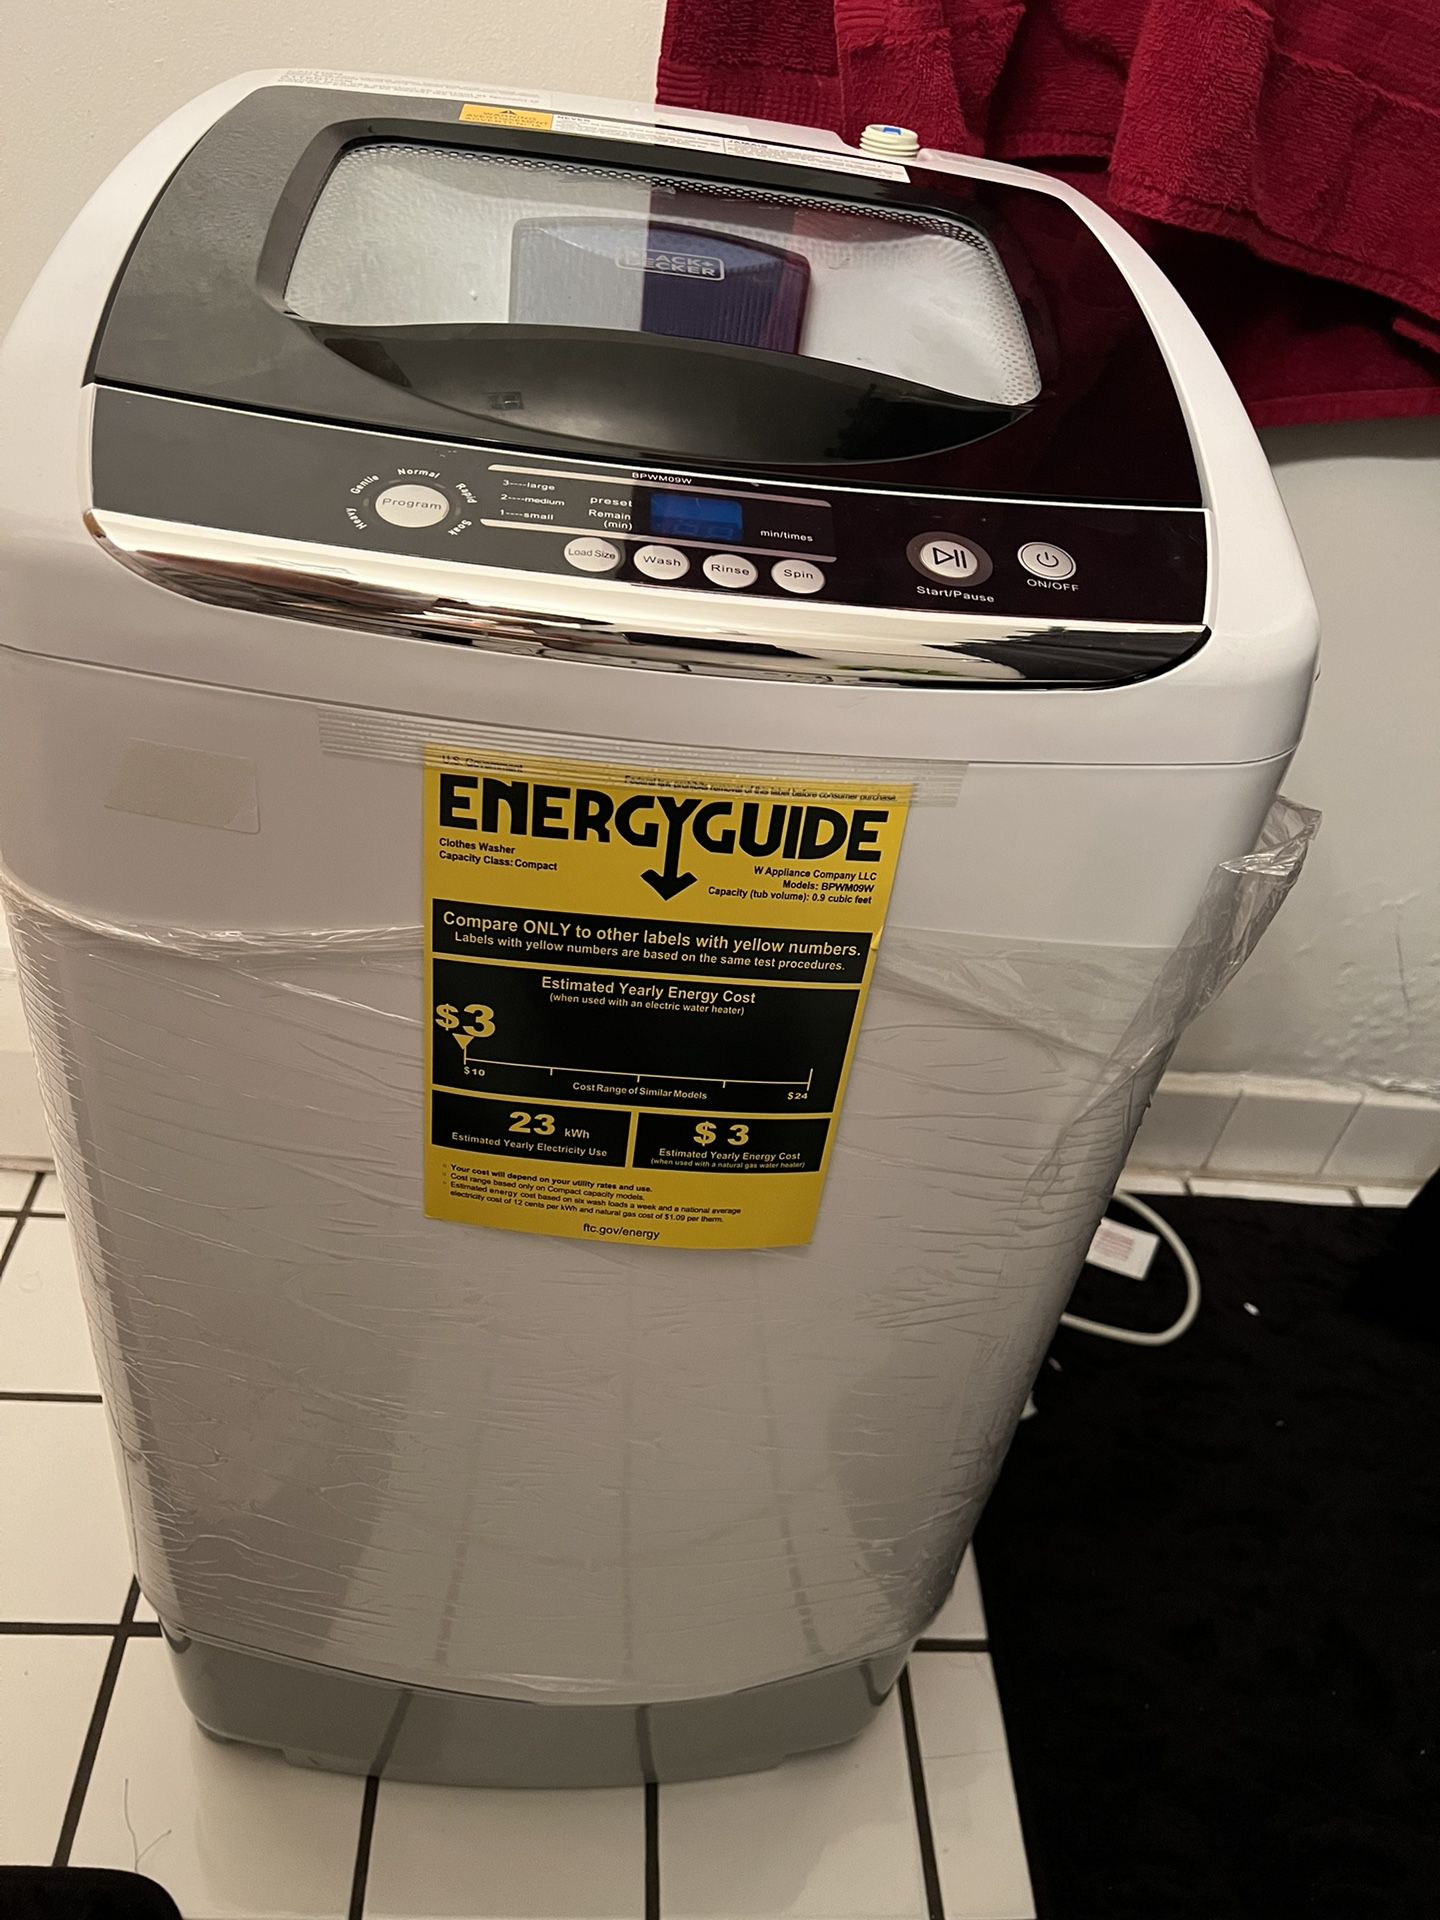 Brand new portable washer